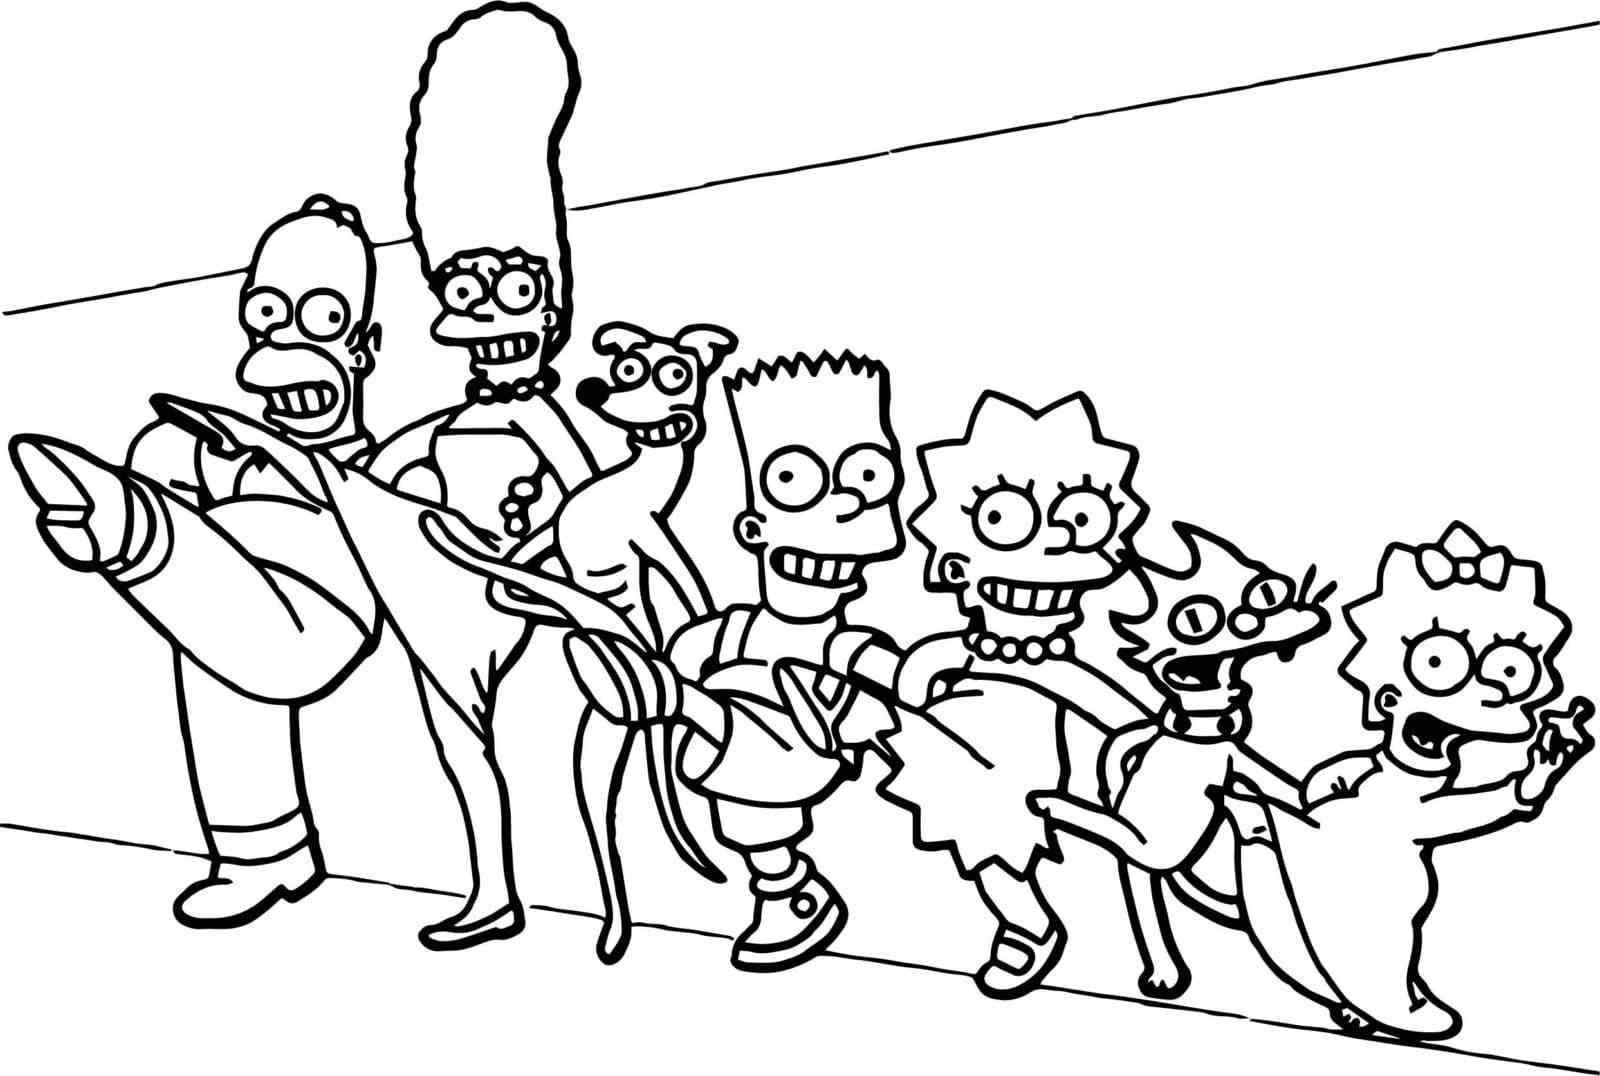 The Dancing Simpsons Family